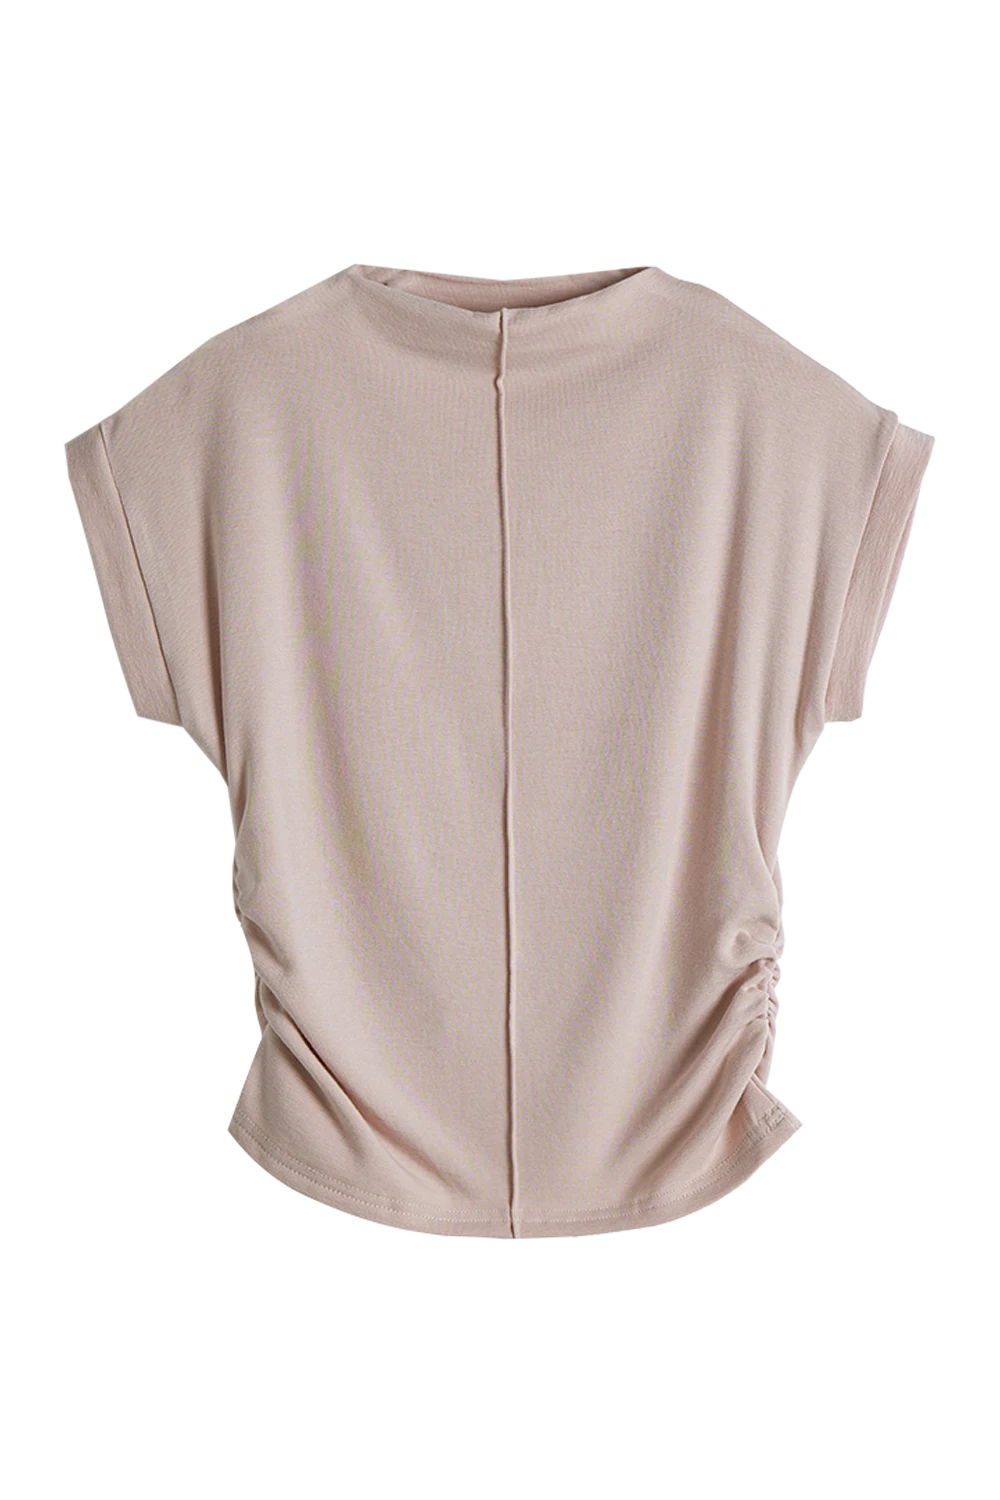 Back Zip Ribbed Top with a Chic Silhouette